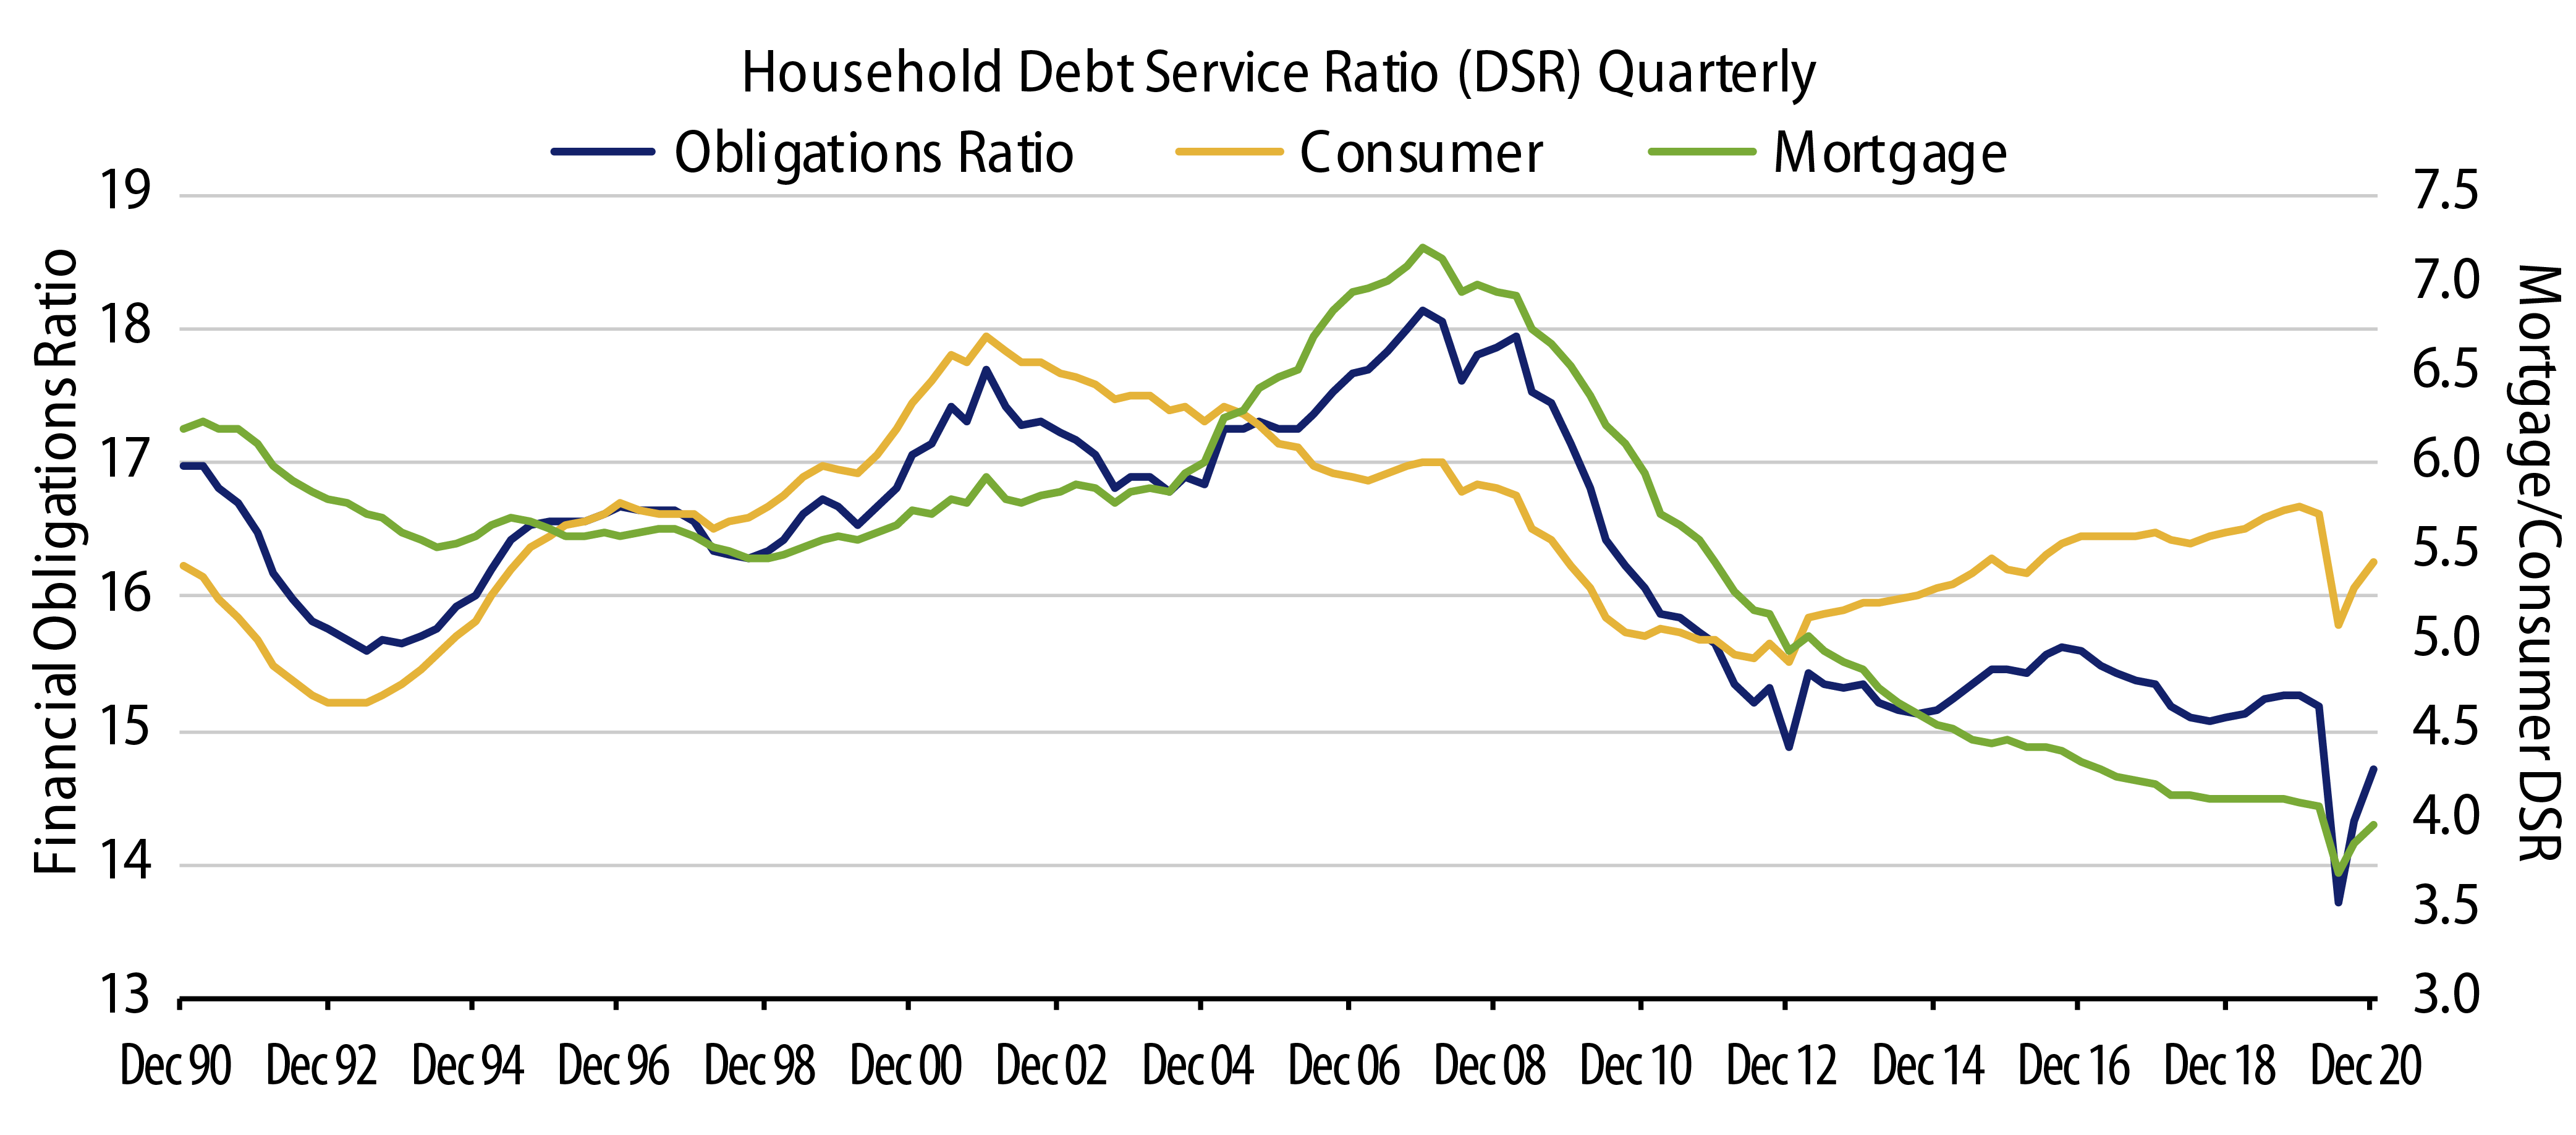 Explore Household Debt Service and Financial Obligations Ratios